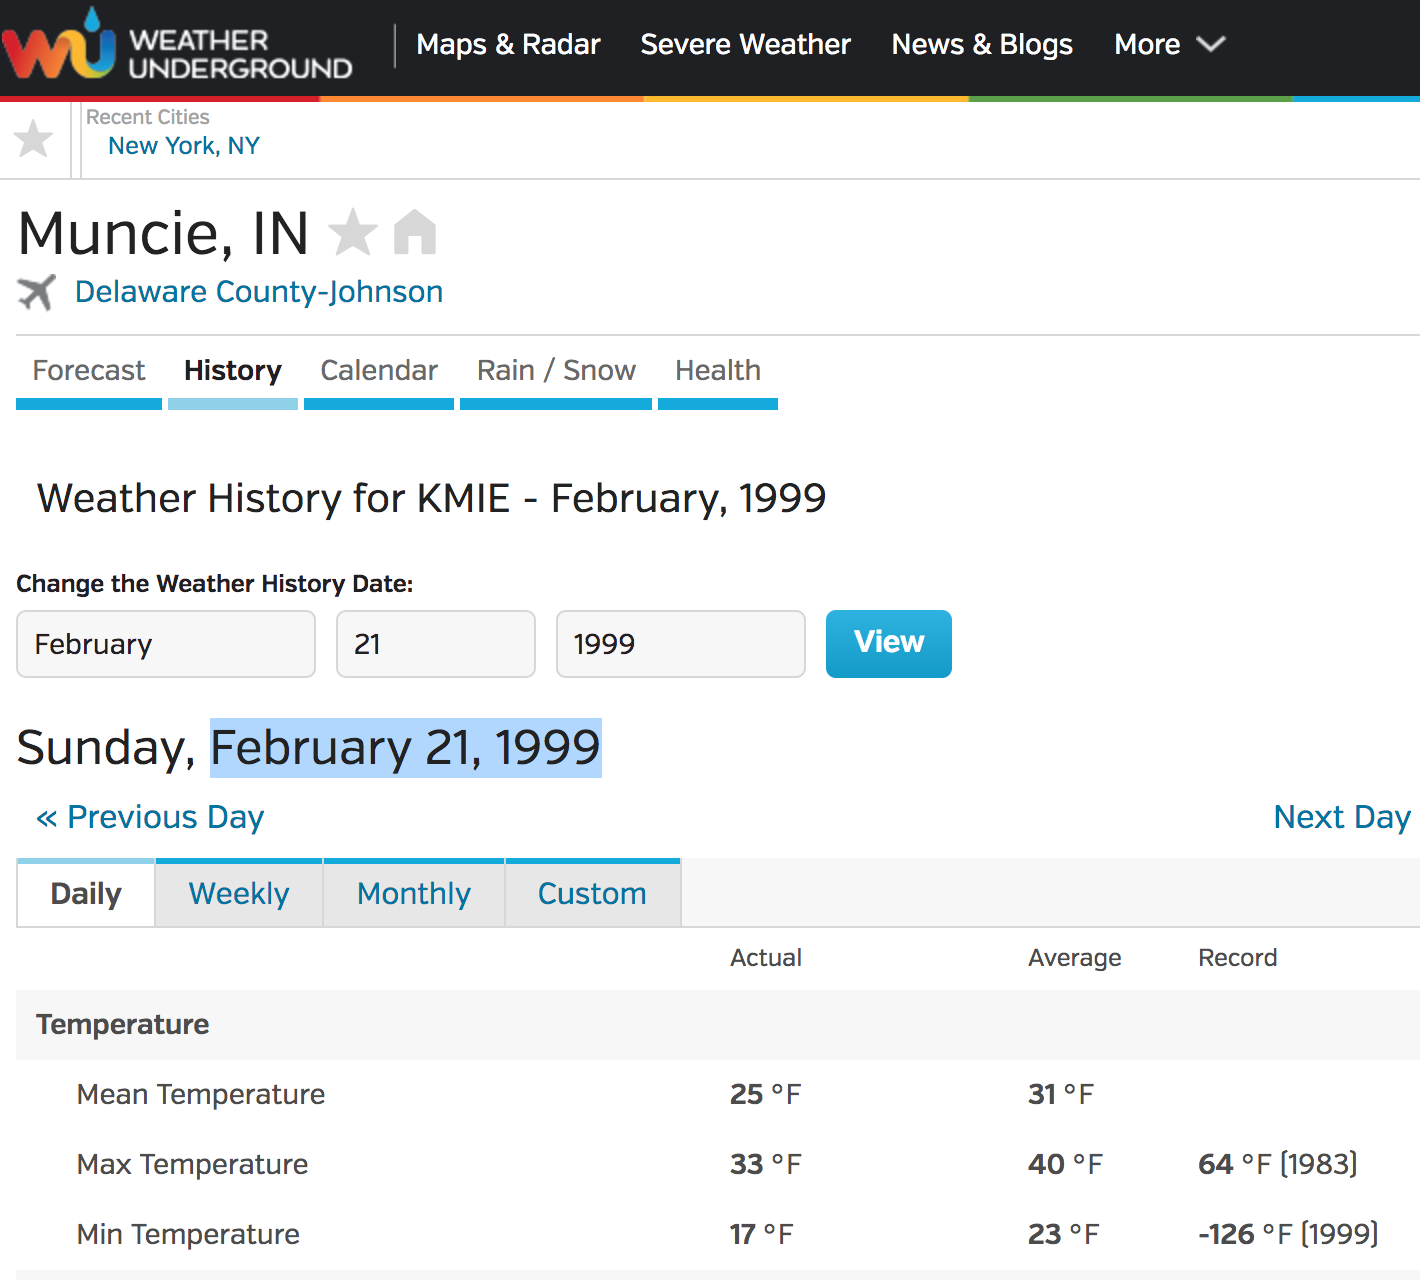 weather underground screen shot for weather in Muncie, Indiana on February 21, 1999 showing a record low of -126